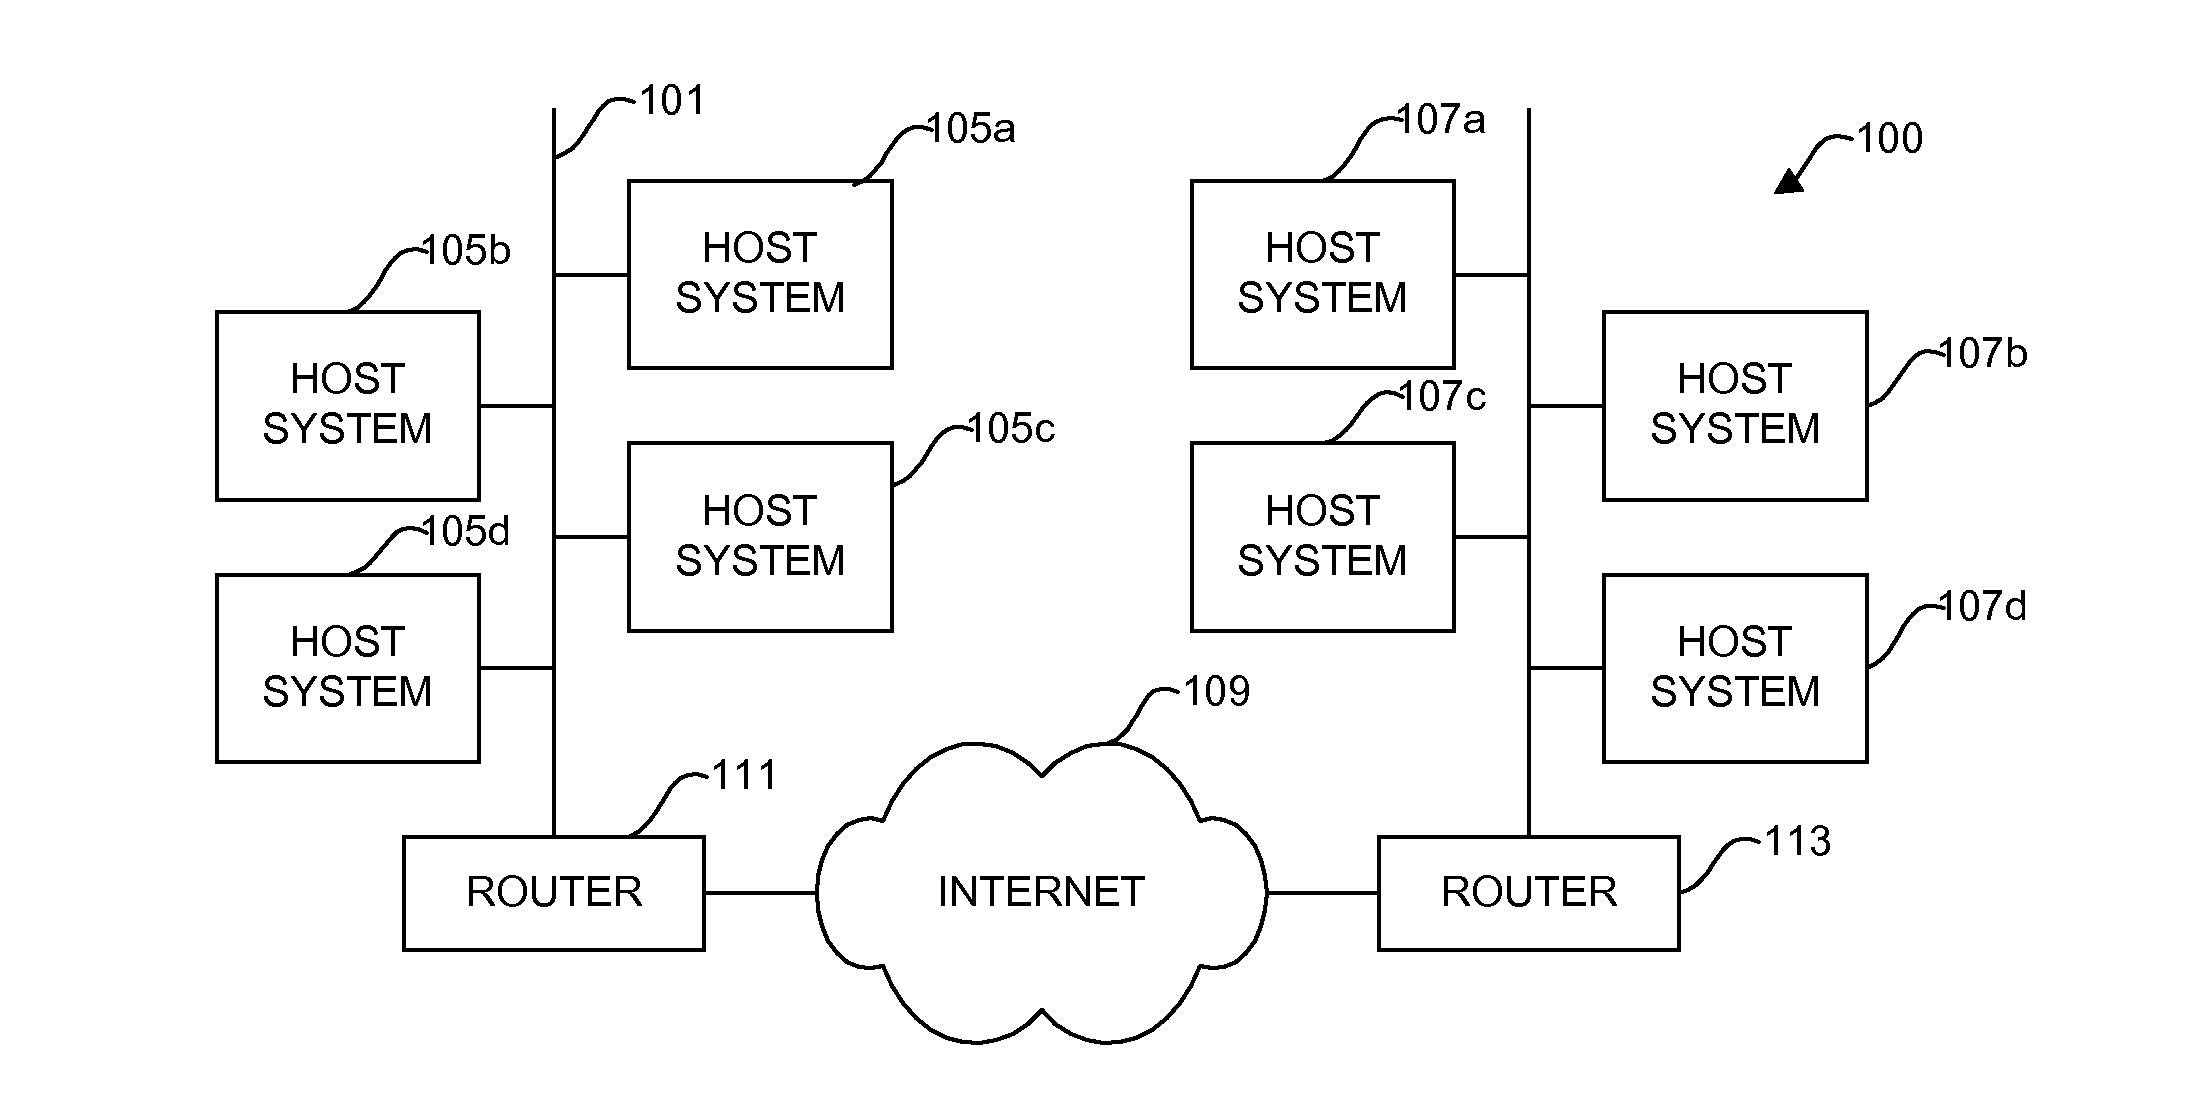 Using transmission control protocol/internet protocol (tcp/ip) to setup high speed out of band data communication connections